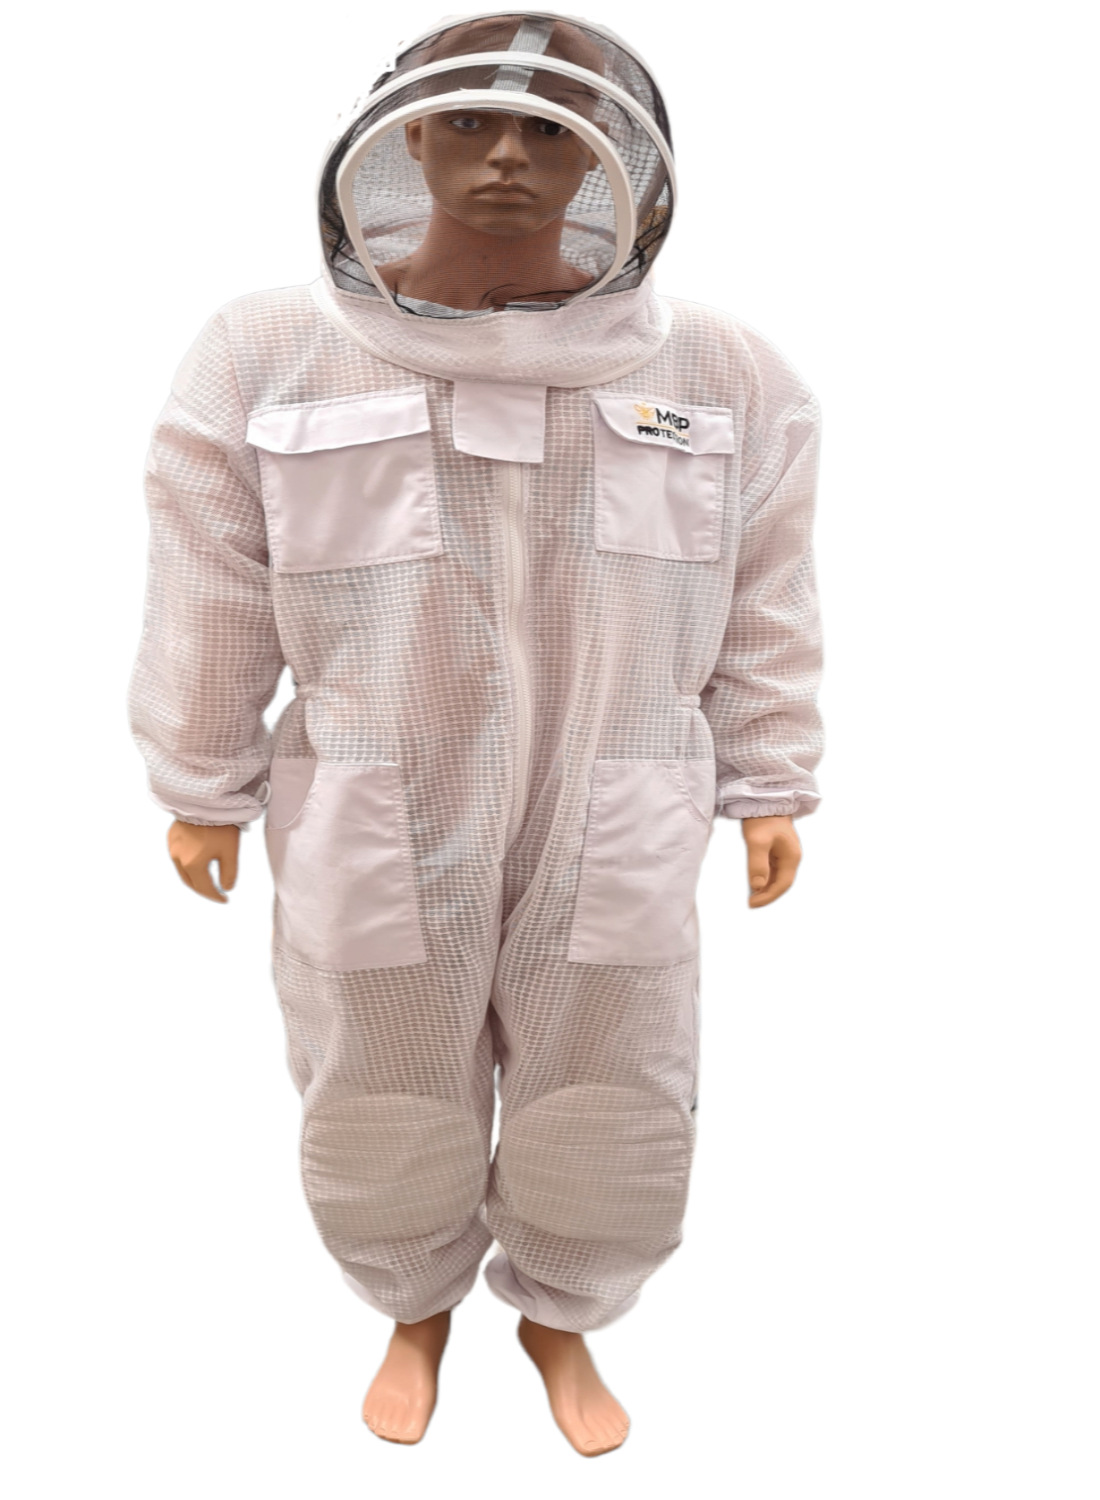 MBP White Protection 3 Layer Bee Suit -